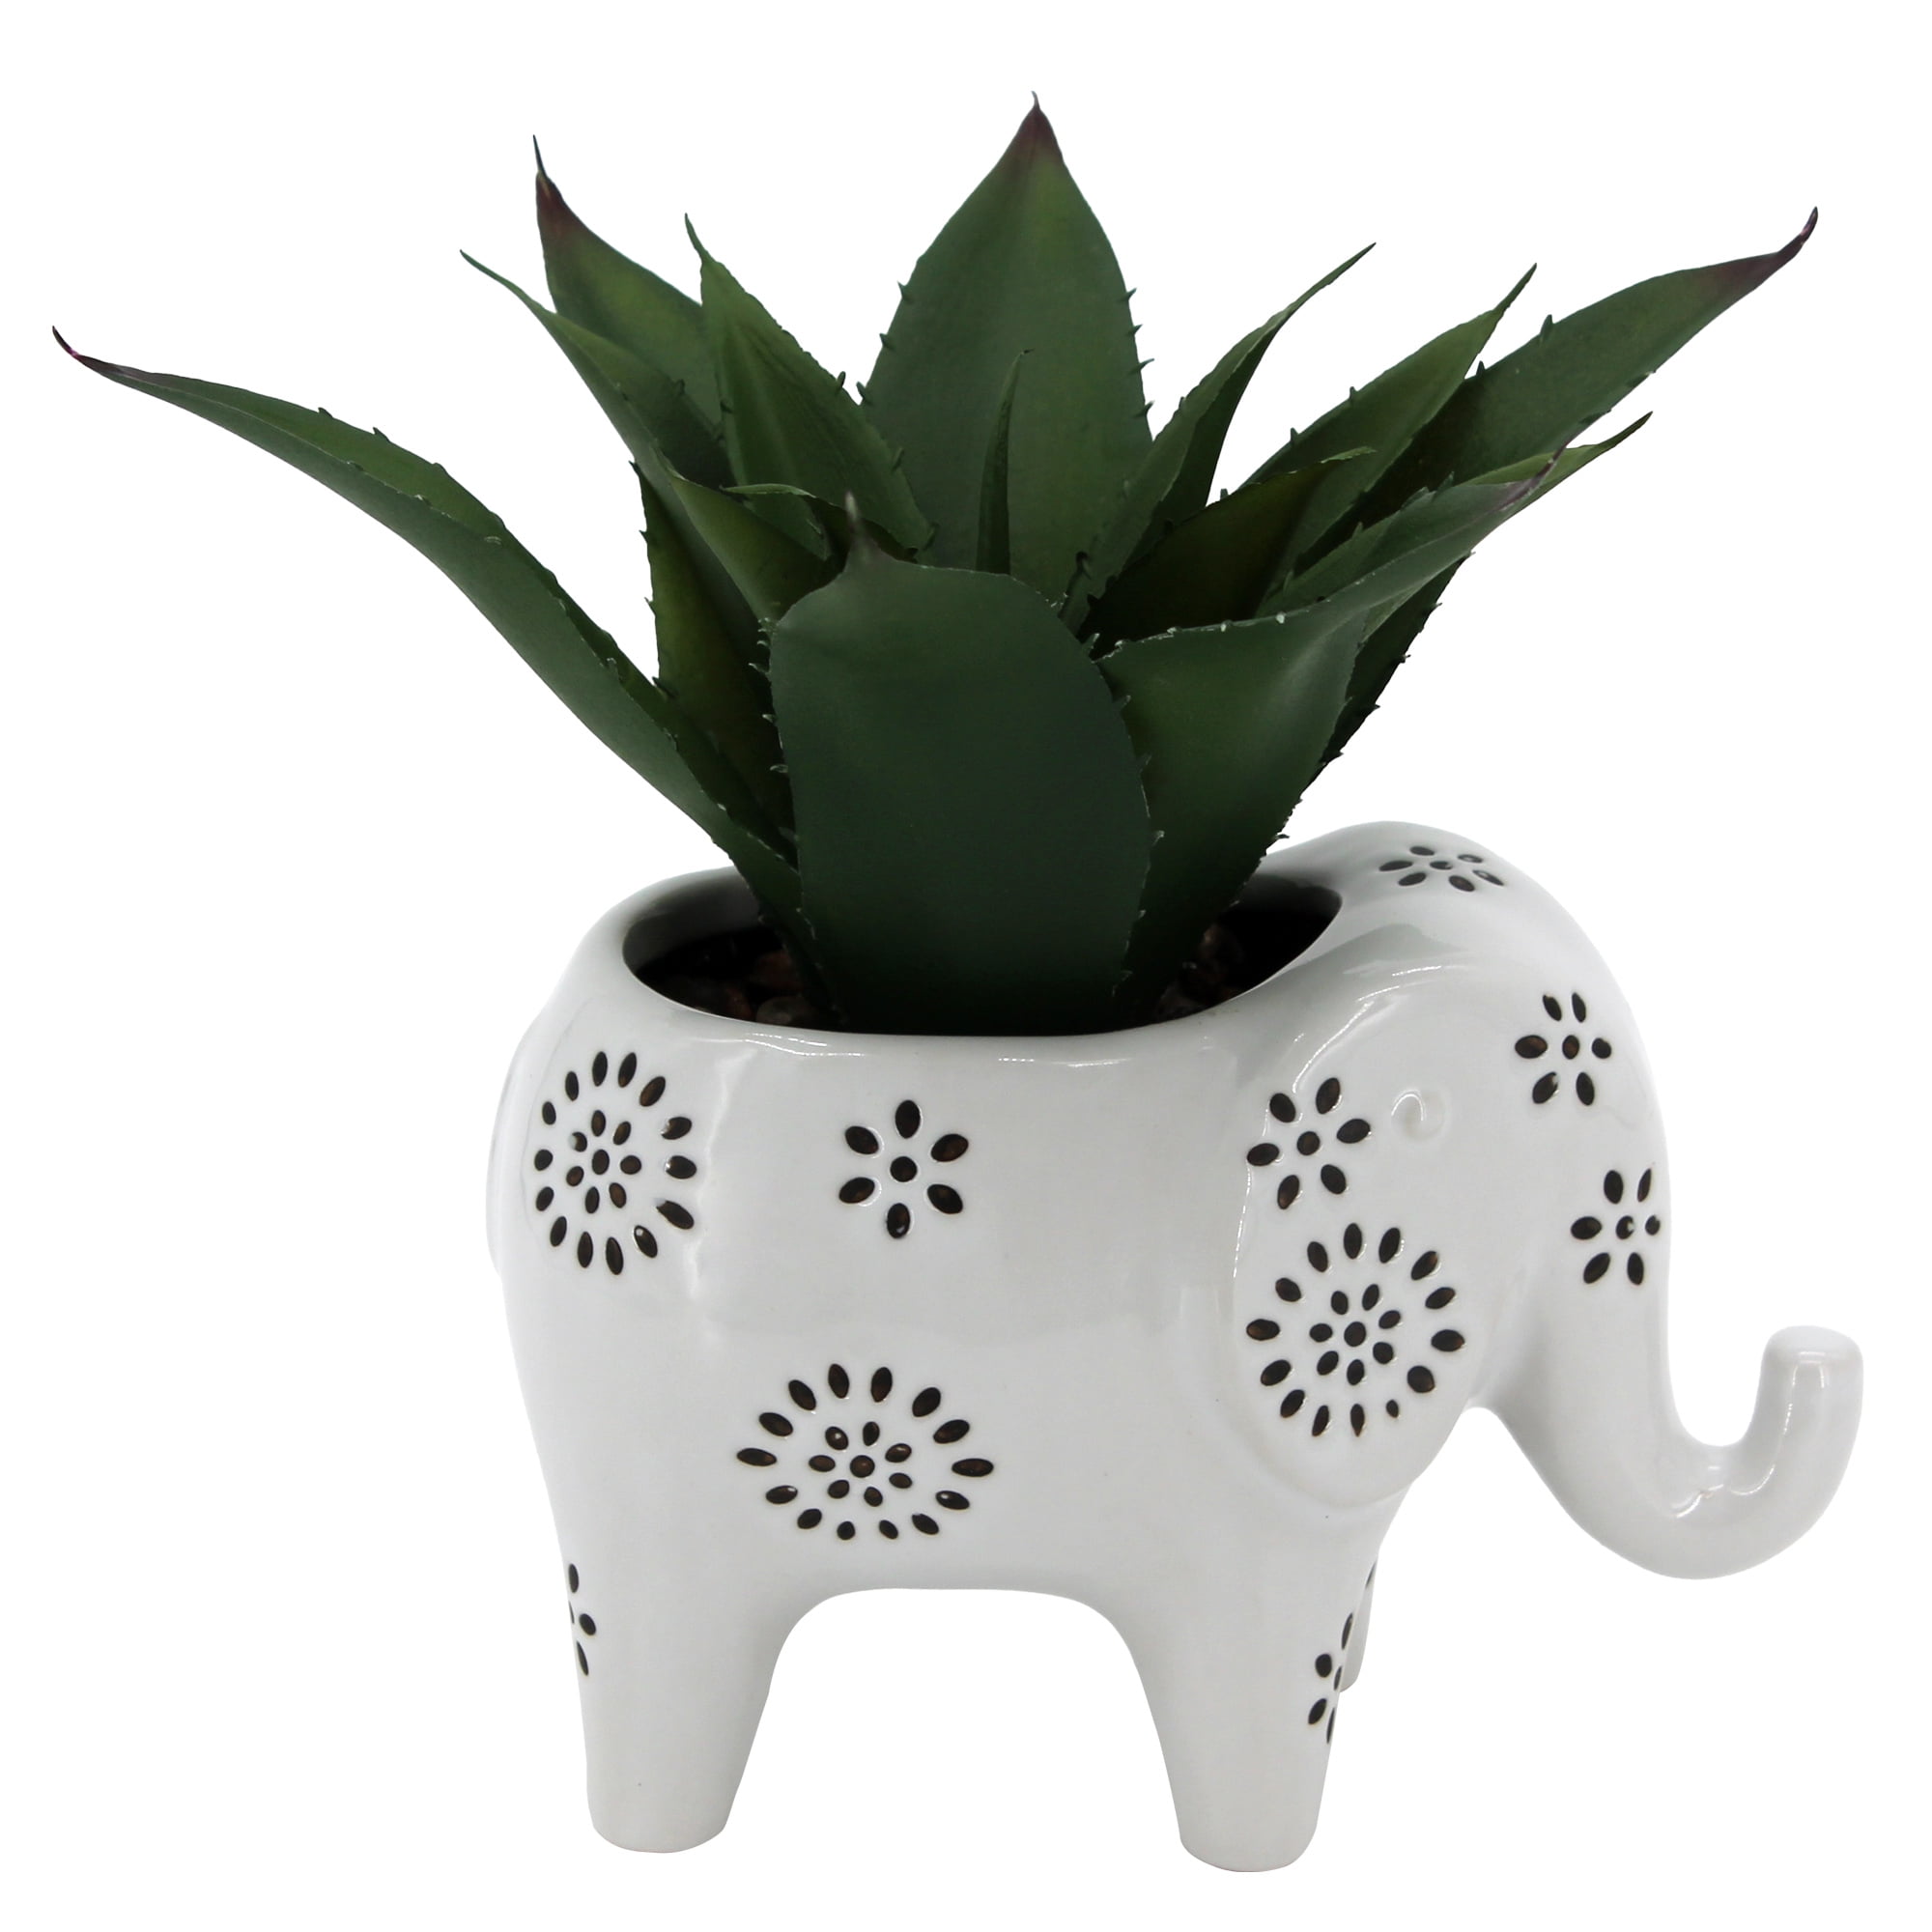 mainstays 7.5" artificial agave plant in elephant white cerarmic planter ,  green